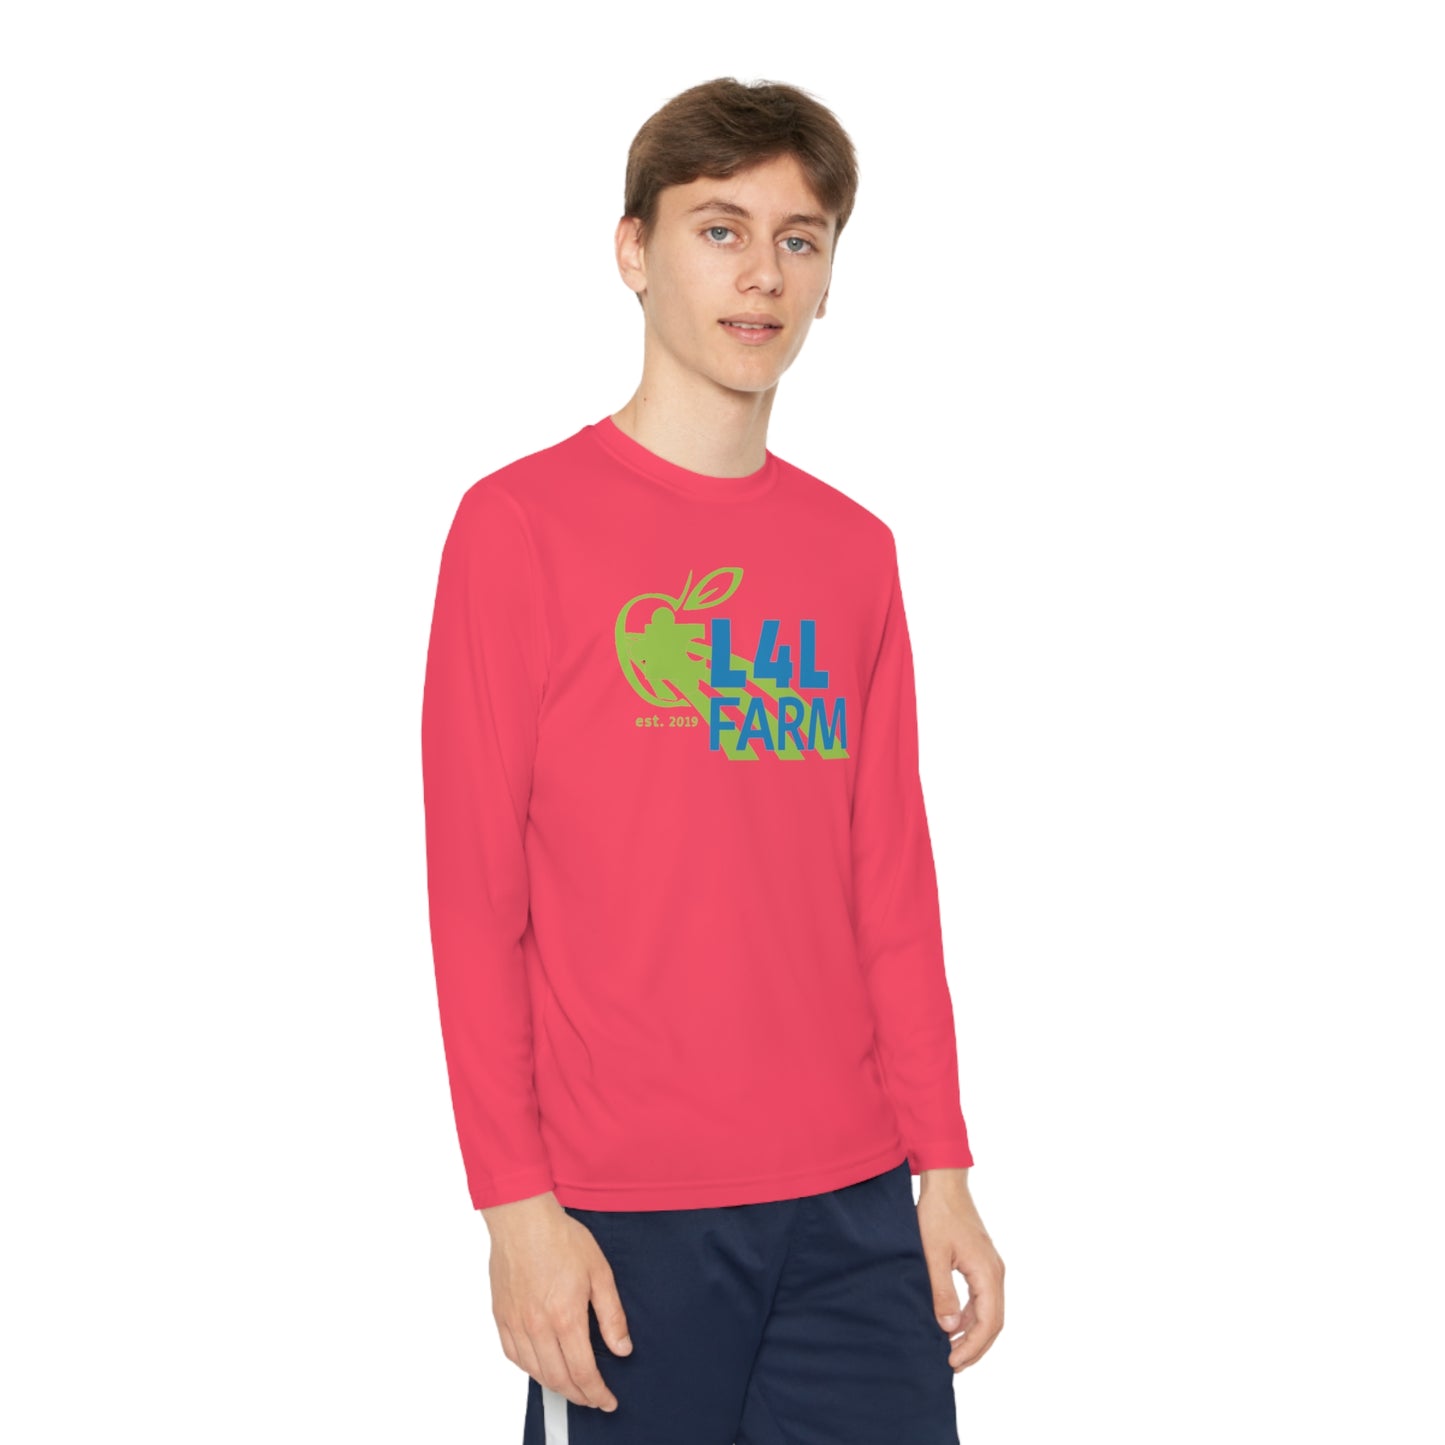 L4L Farm Youth Long Sleeve Competitor Tee